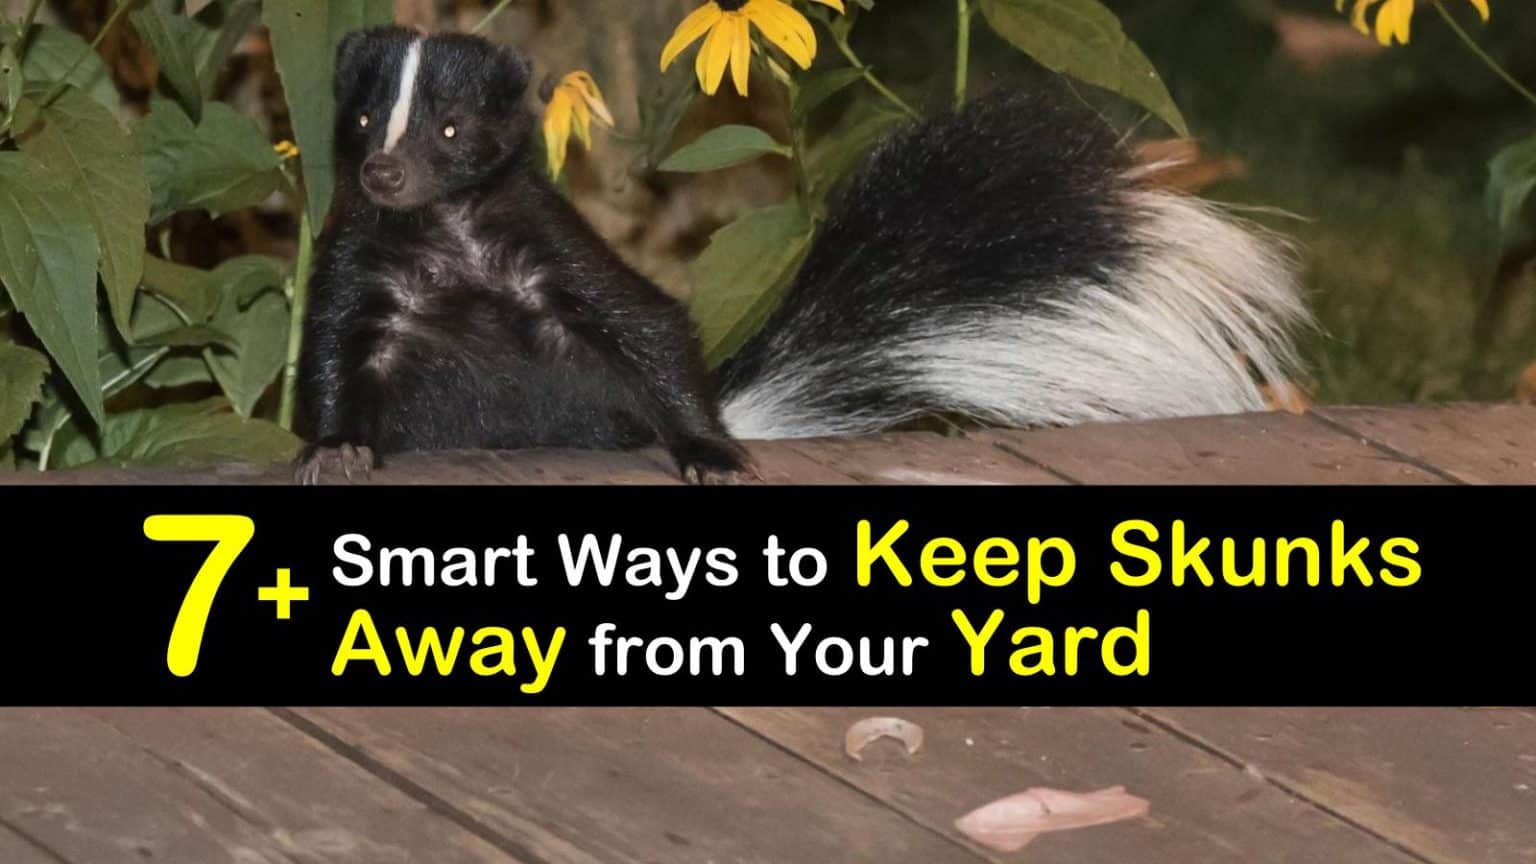 7+ Smart Ways to Keep Skunks Away from Your Yard